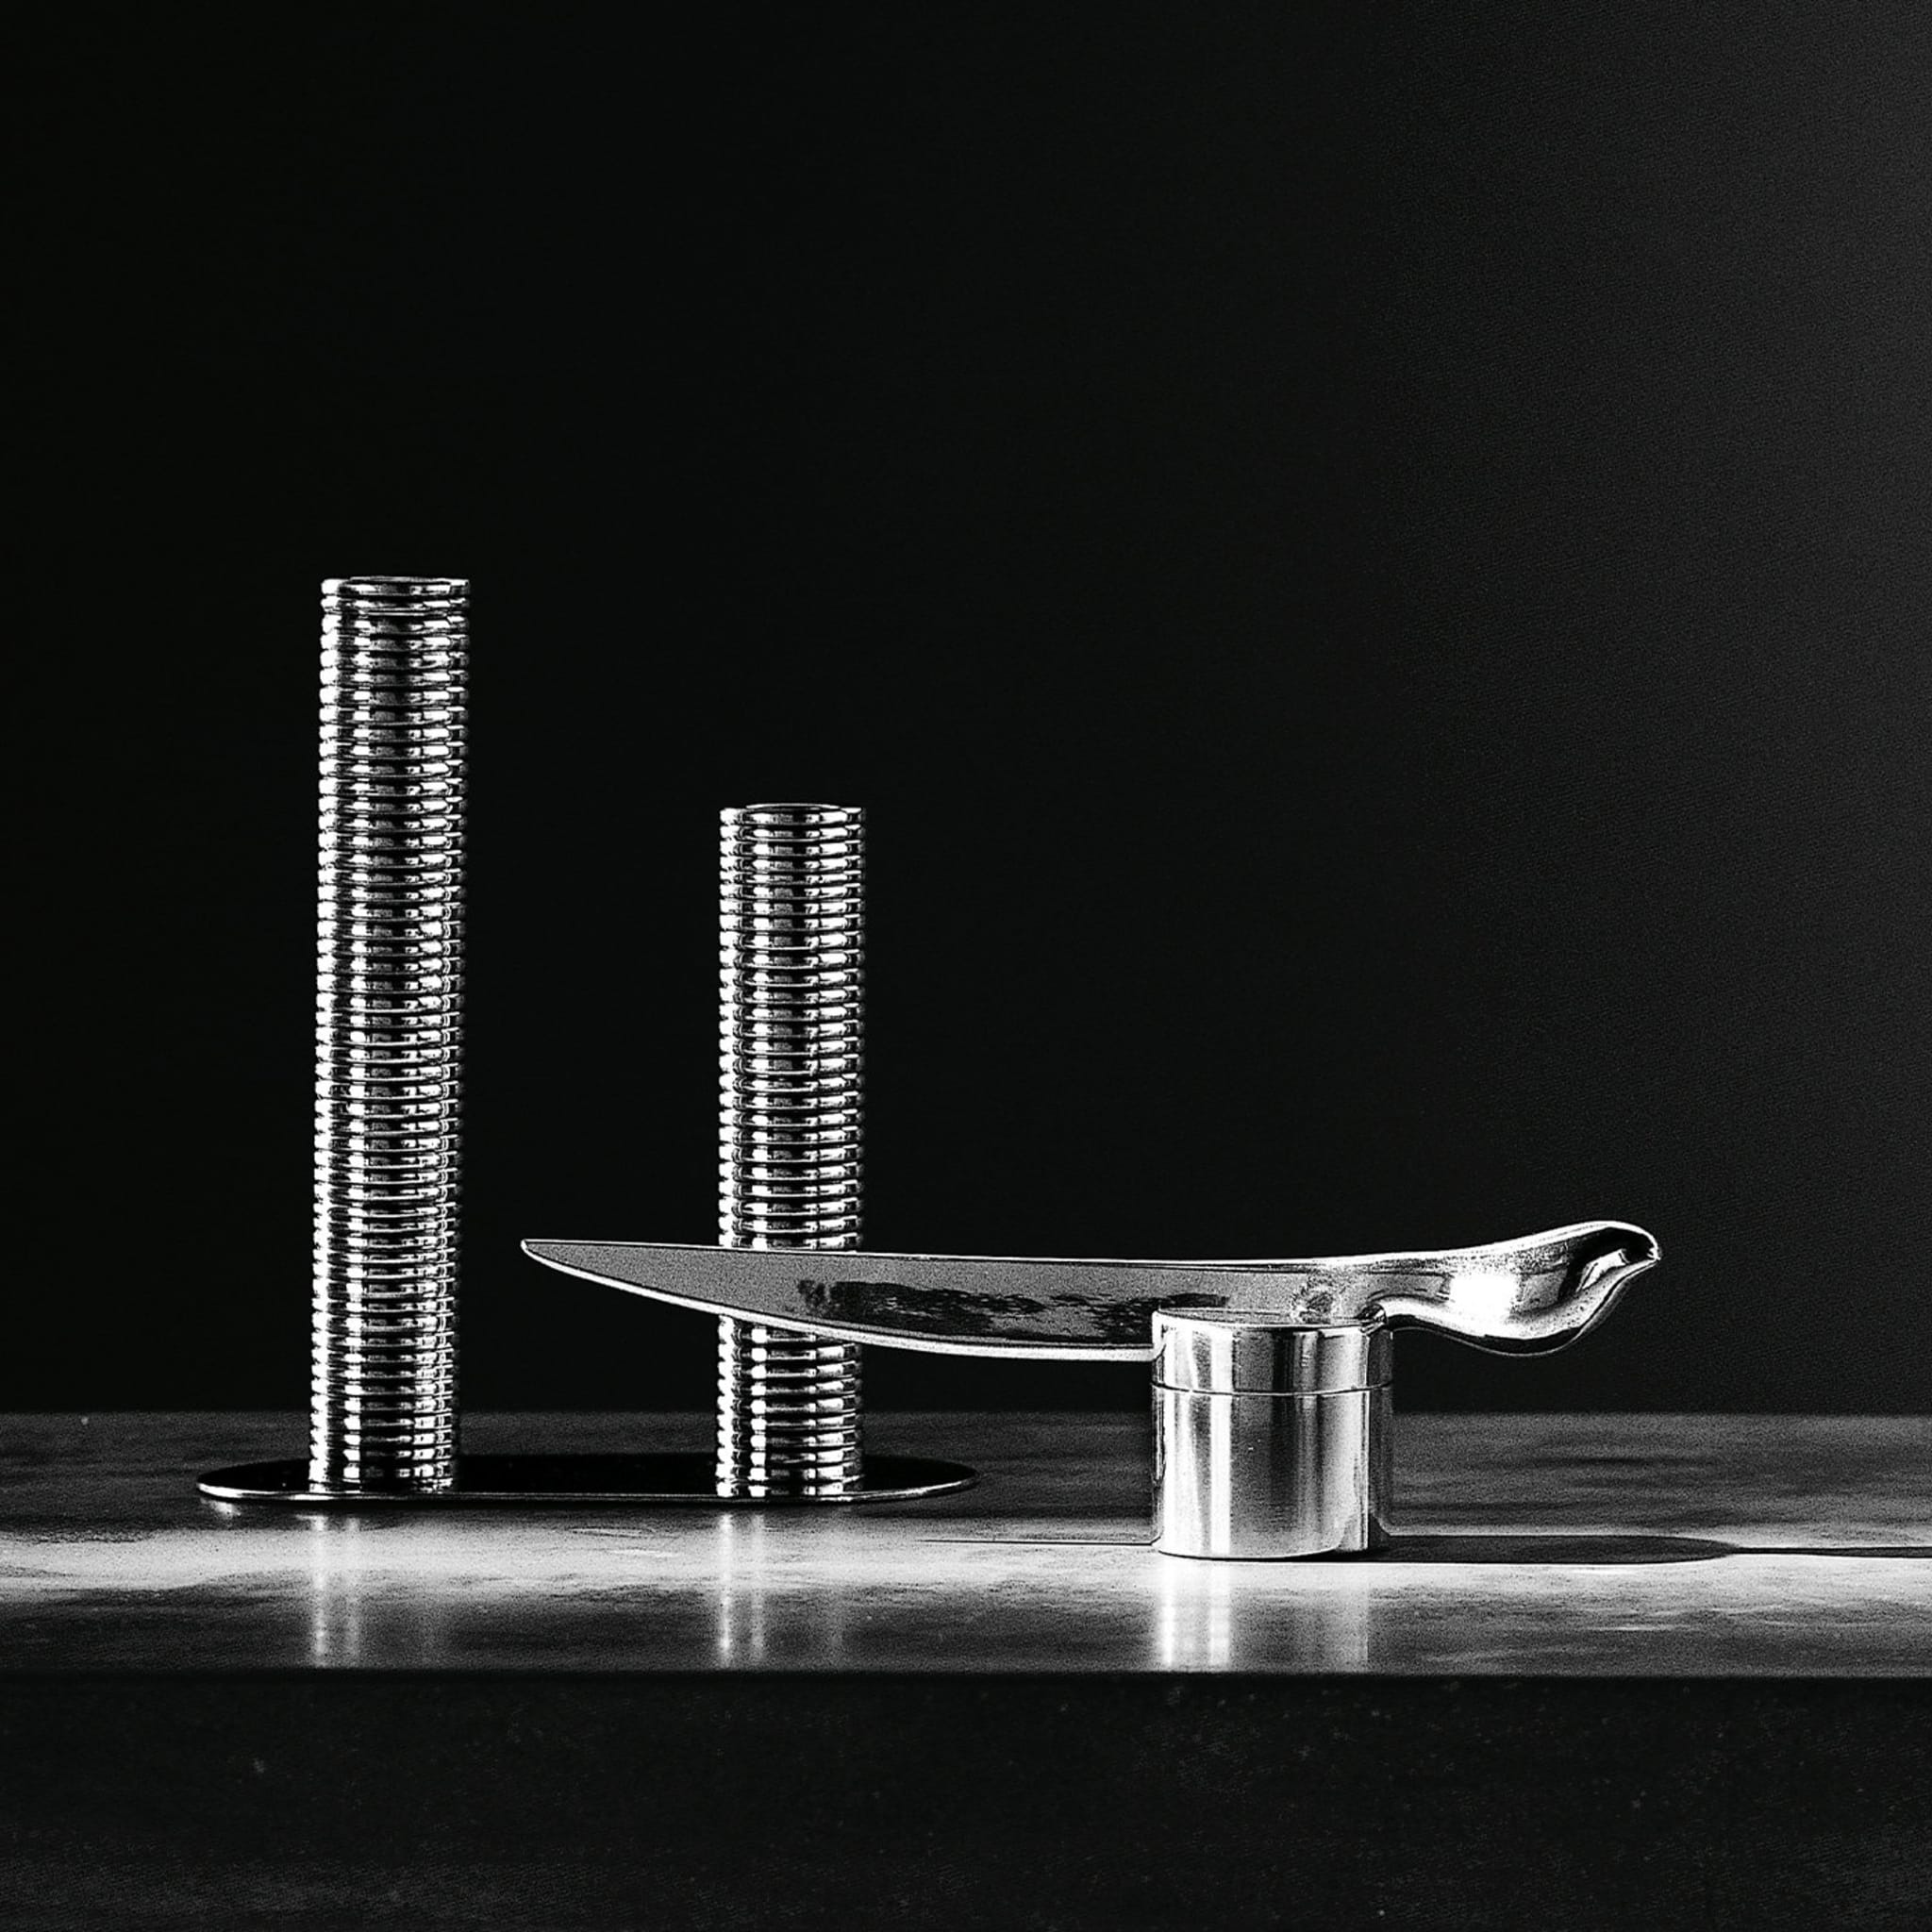 Cosma and Damiano Limited Edition Candle Holder by Marco Susani and Mario Trimarchi - Alternative view 1